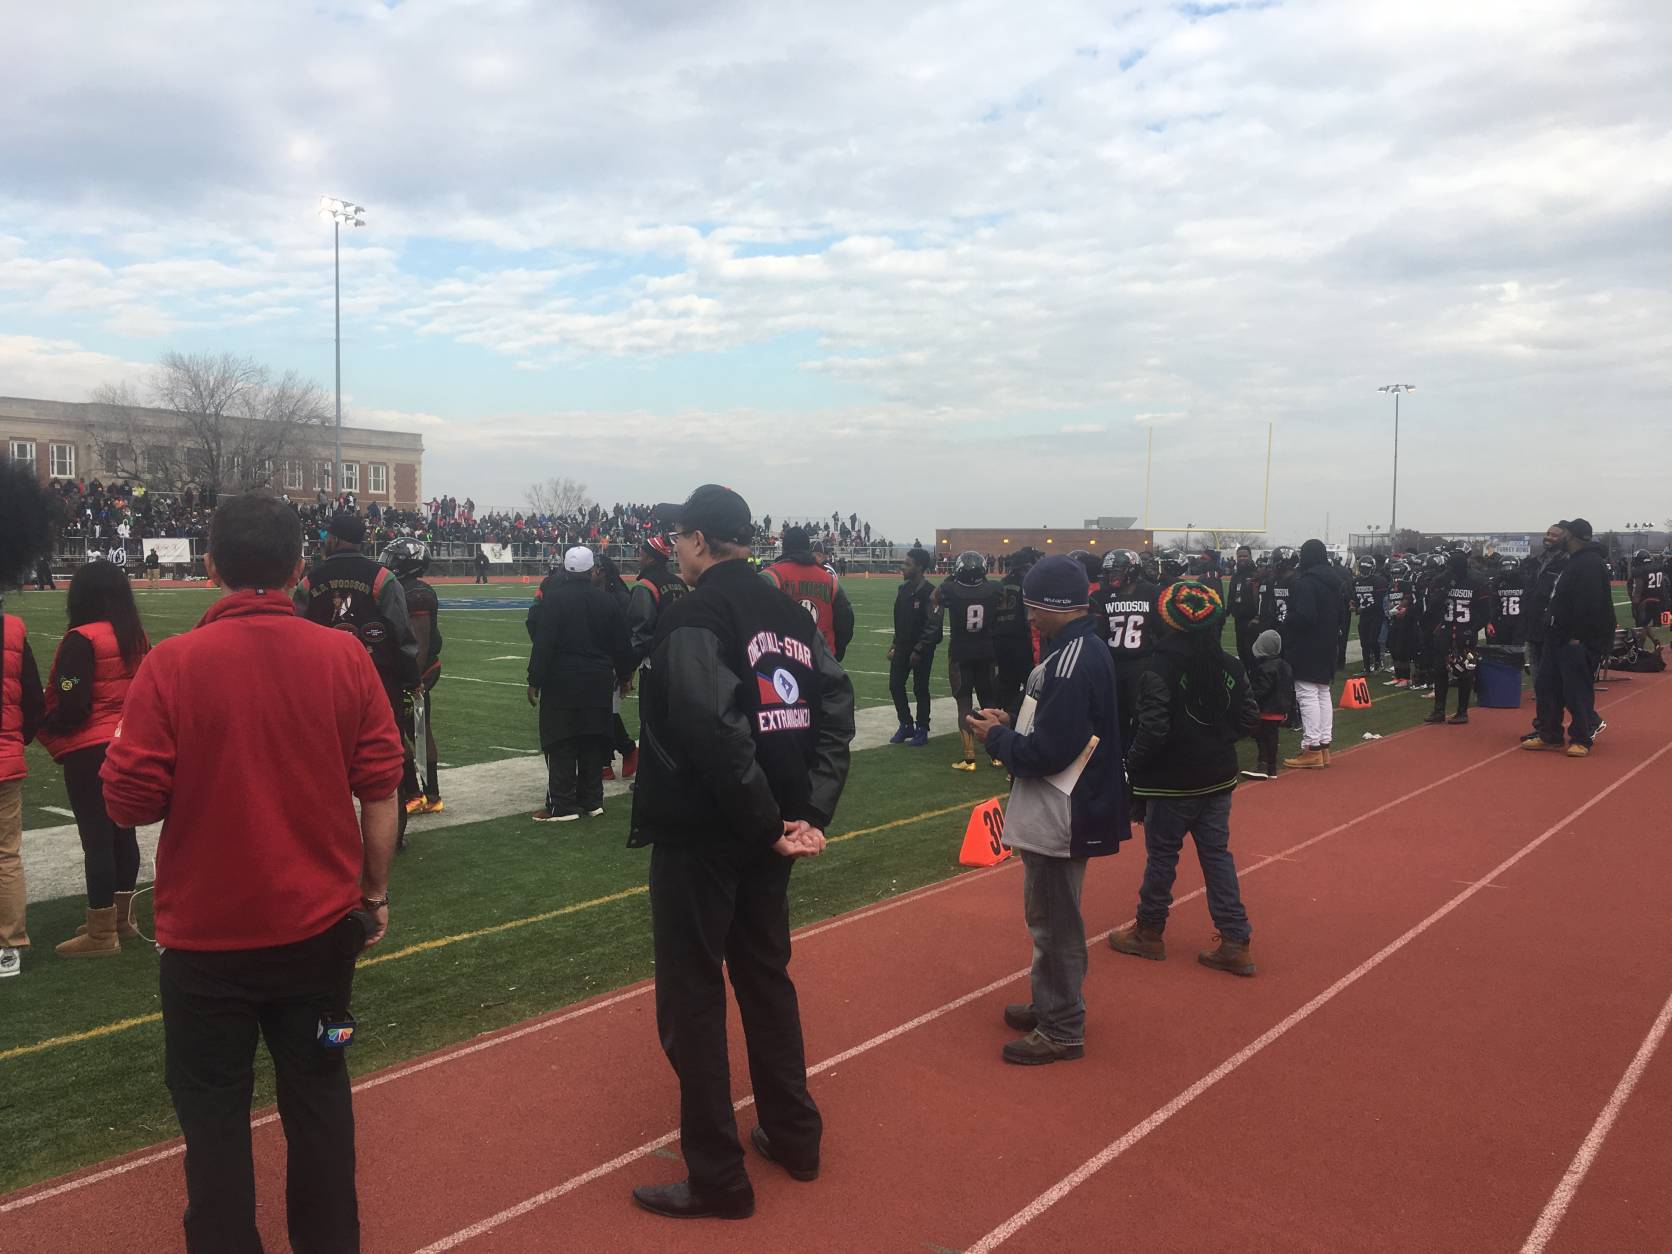 The Turkey Bowl isn’t only about the football game. For many, it’s a place for current and past D.C. schools students to come together. This is a scene from the Turkey Bowl on Nov. 24, 2016. (WTOP/Mike Murillo)